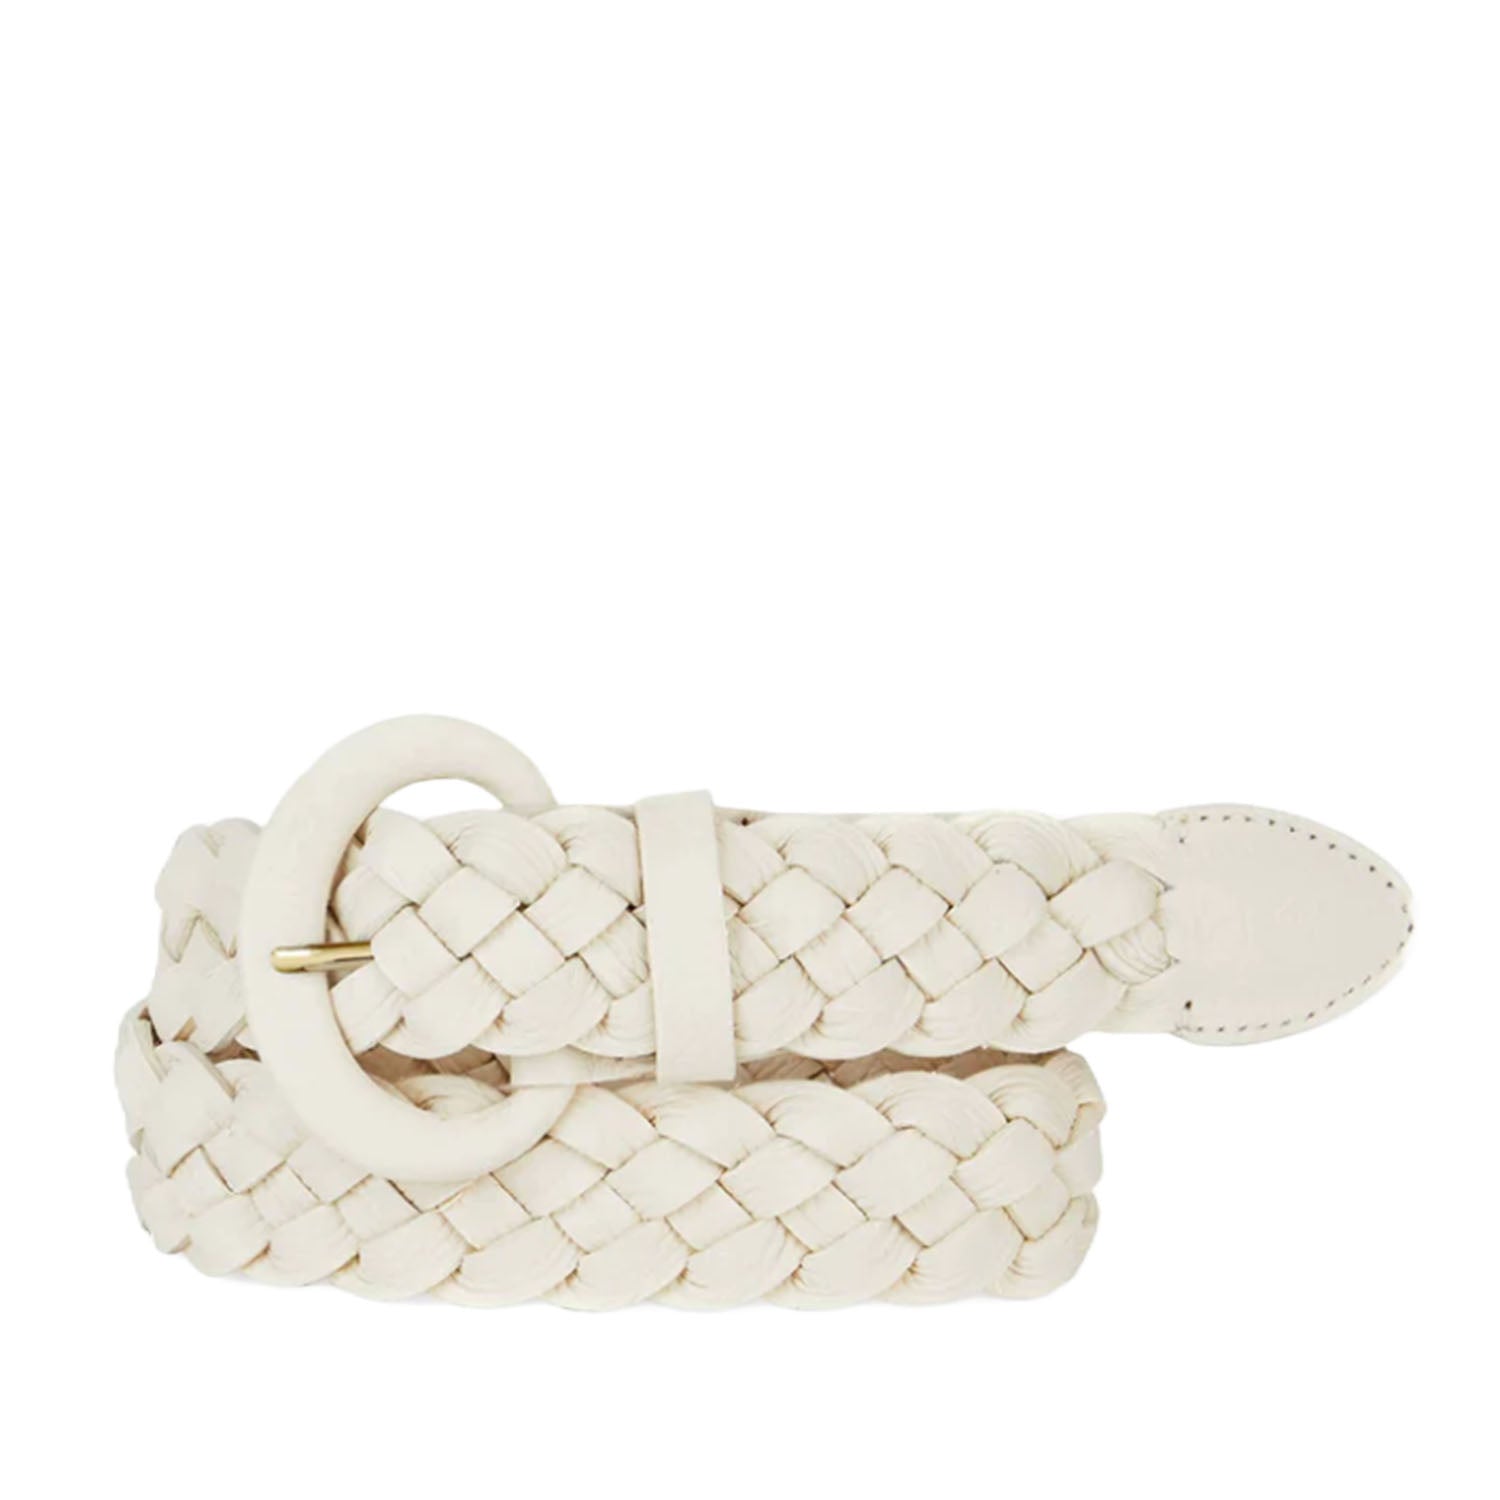 Brave Leather Women's Nori Braided in Marble Nappa